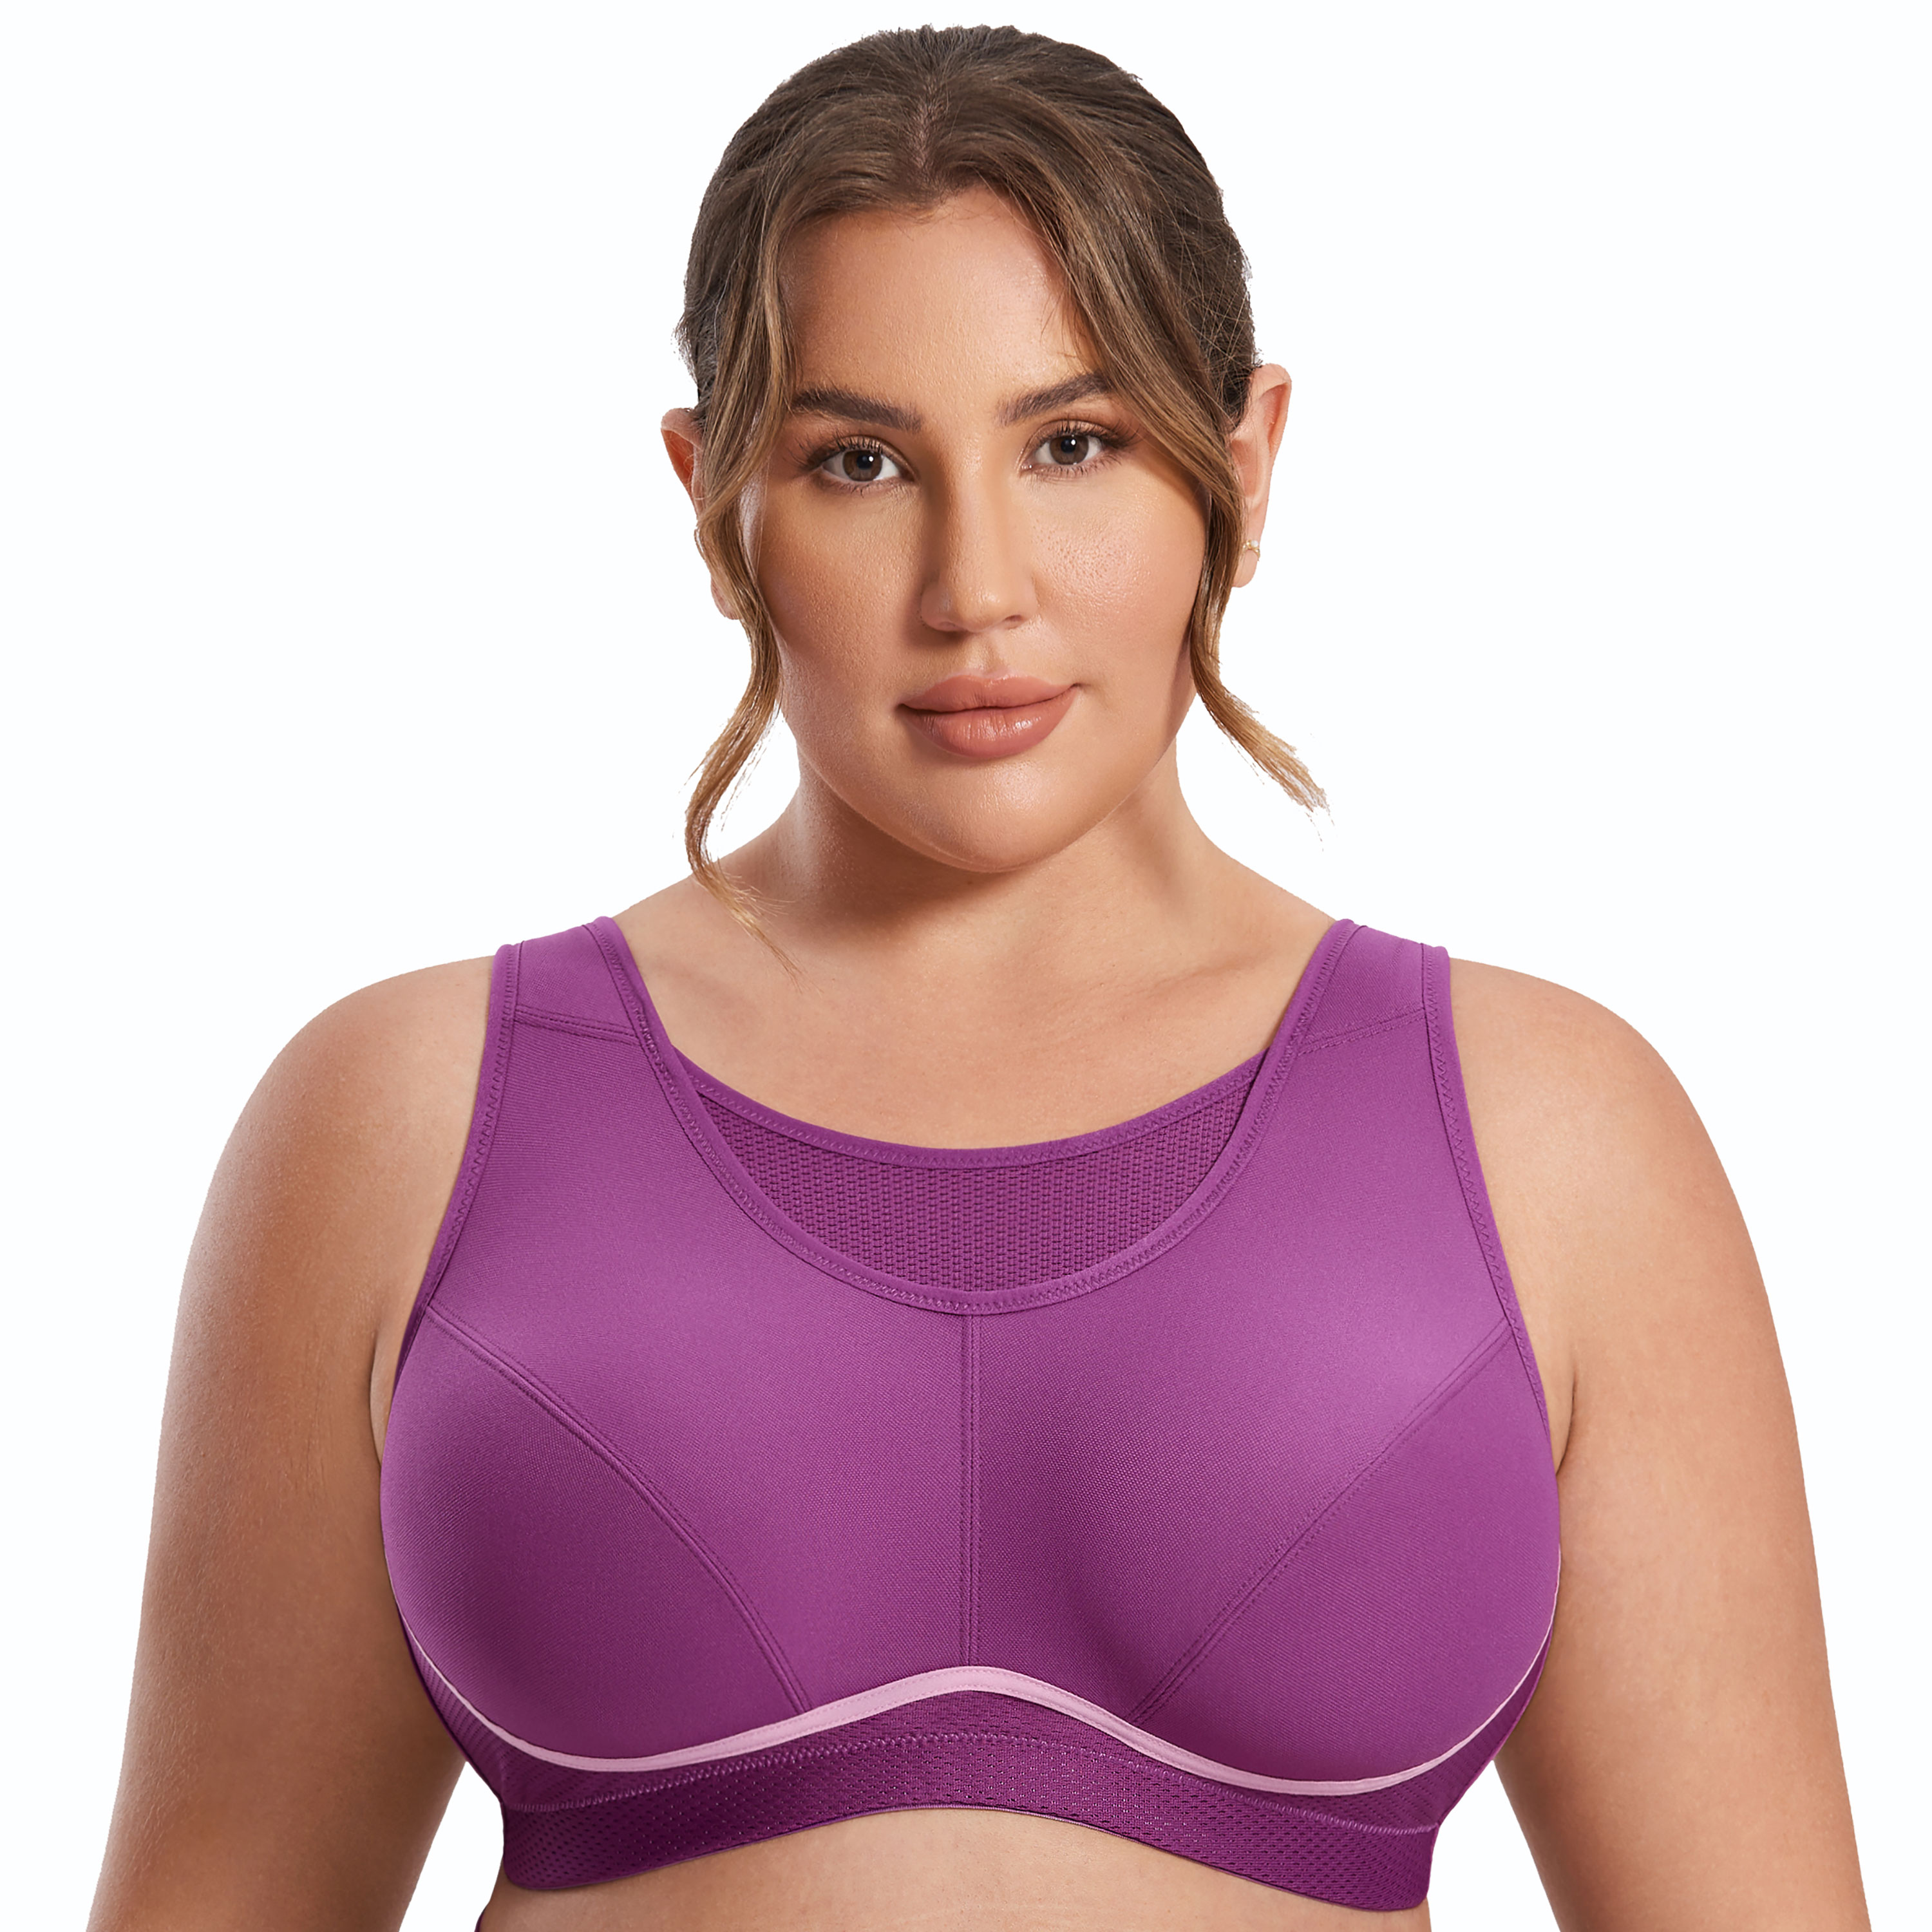 Buy SYROKAN Women's High Impact Support Full Coverage Underwire